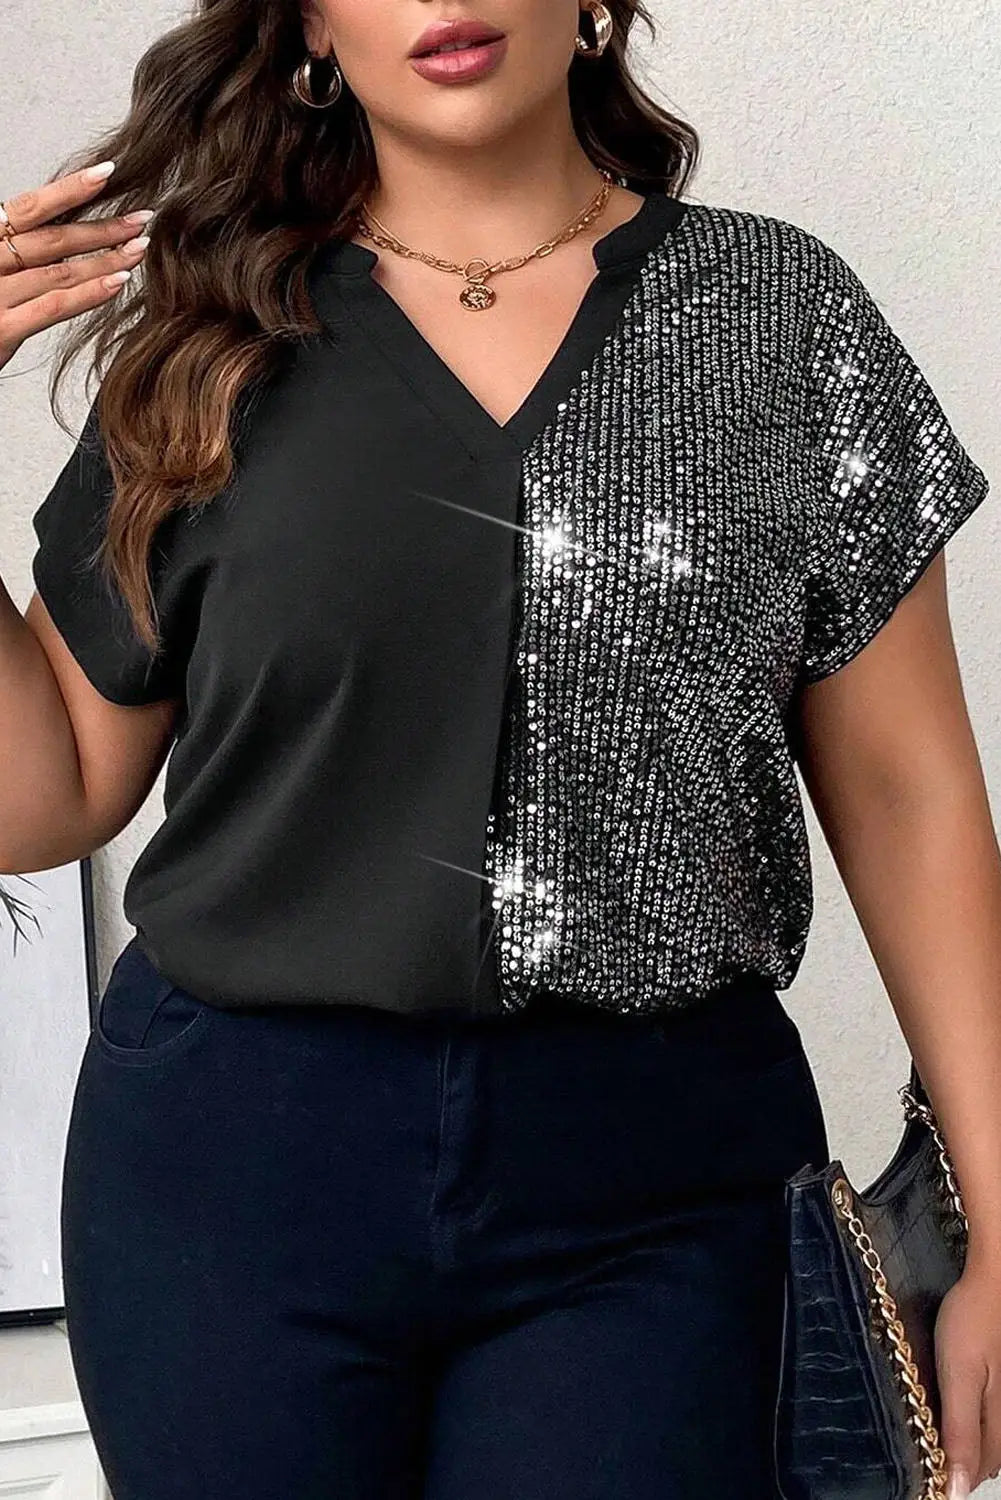 Black plus size sequined v neck top - 1x / 95% polyester + 5% elastane - size/plus tops/plus tops & tees